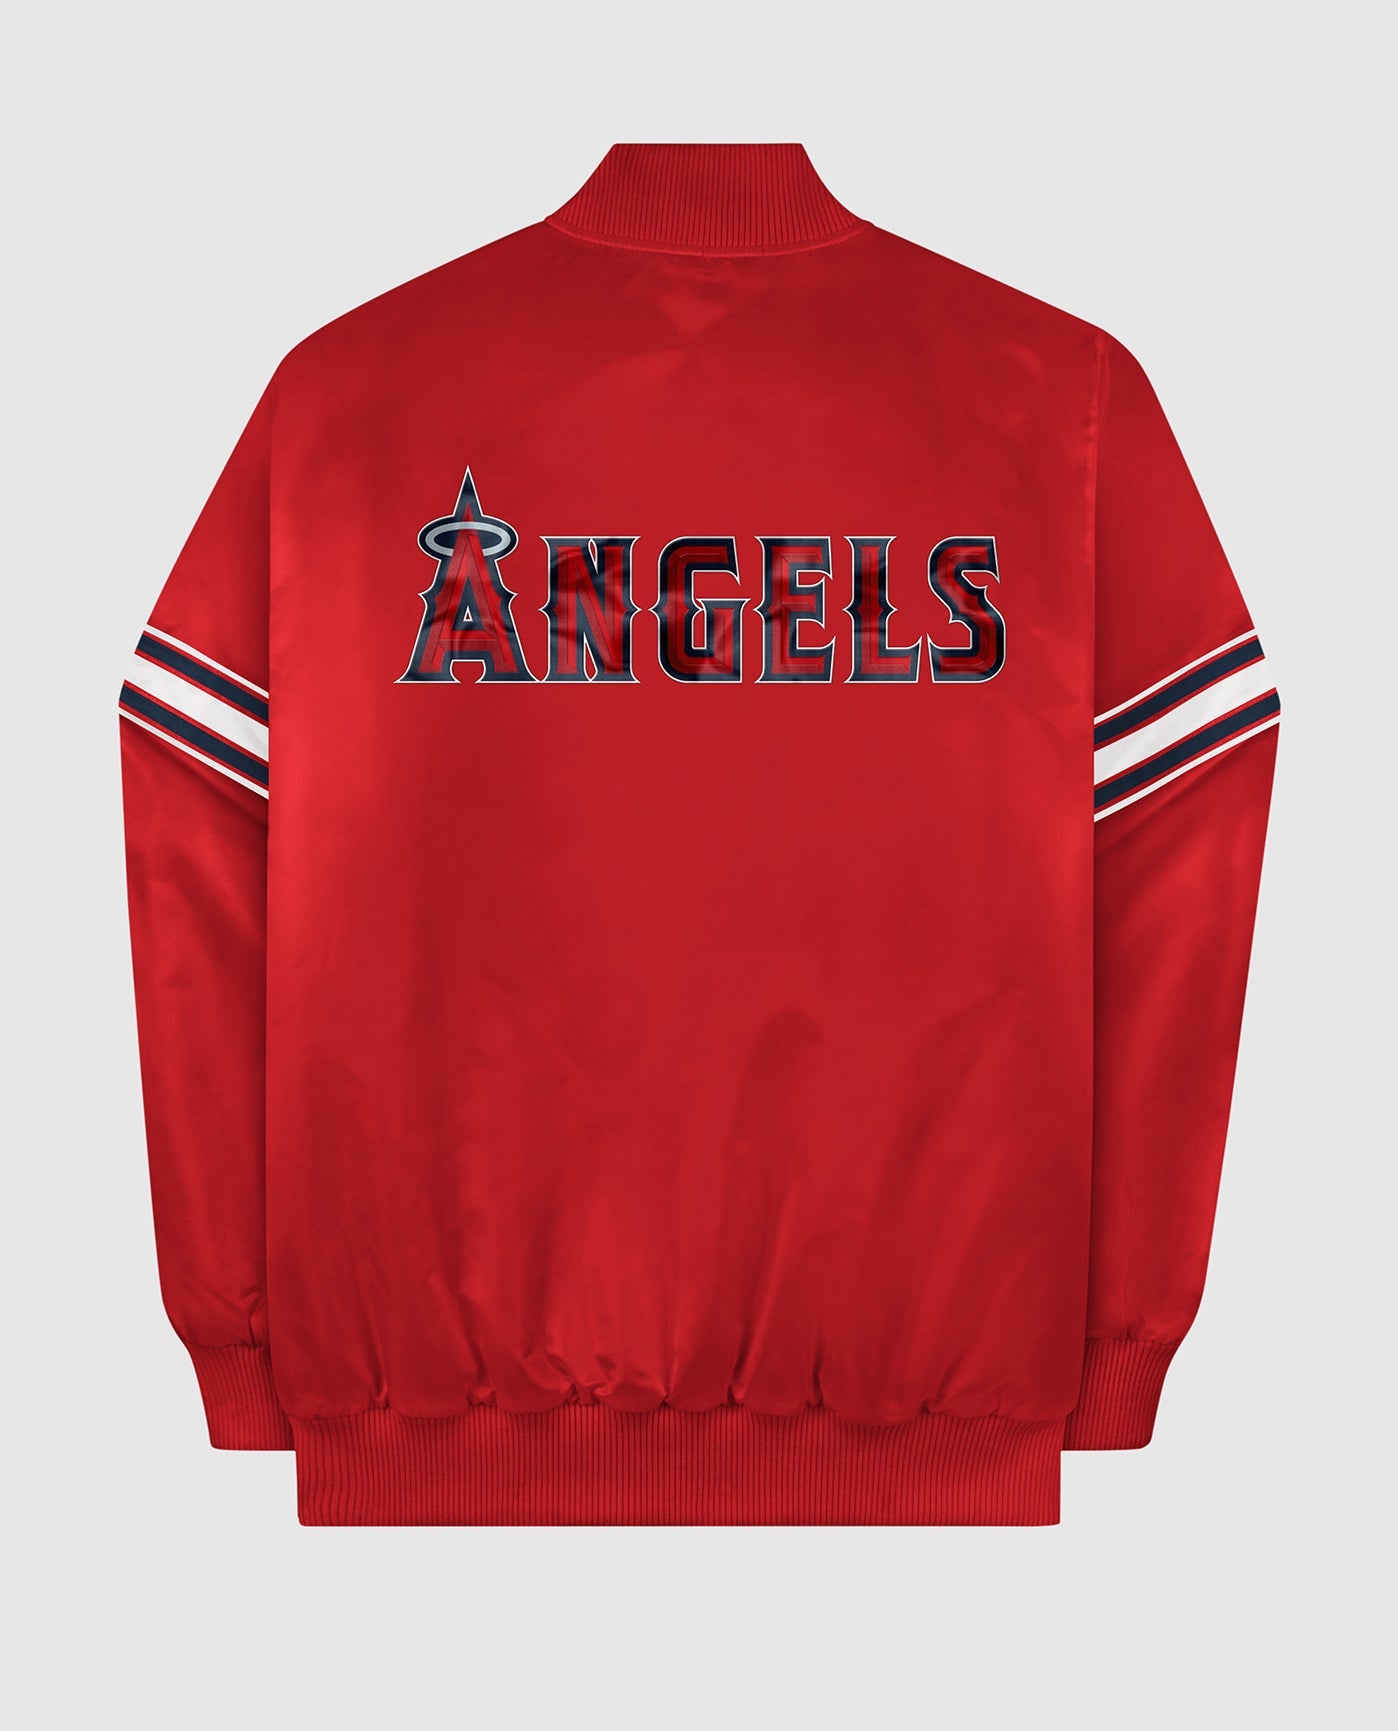 Men's Majestic Red Los Angeles Angels Official Cool Base Jersey